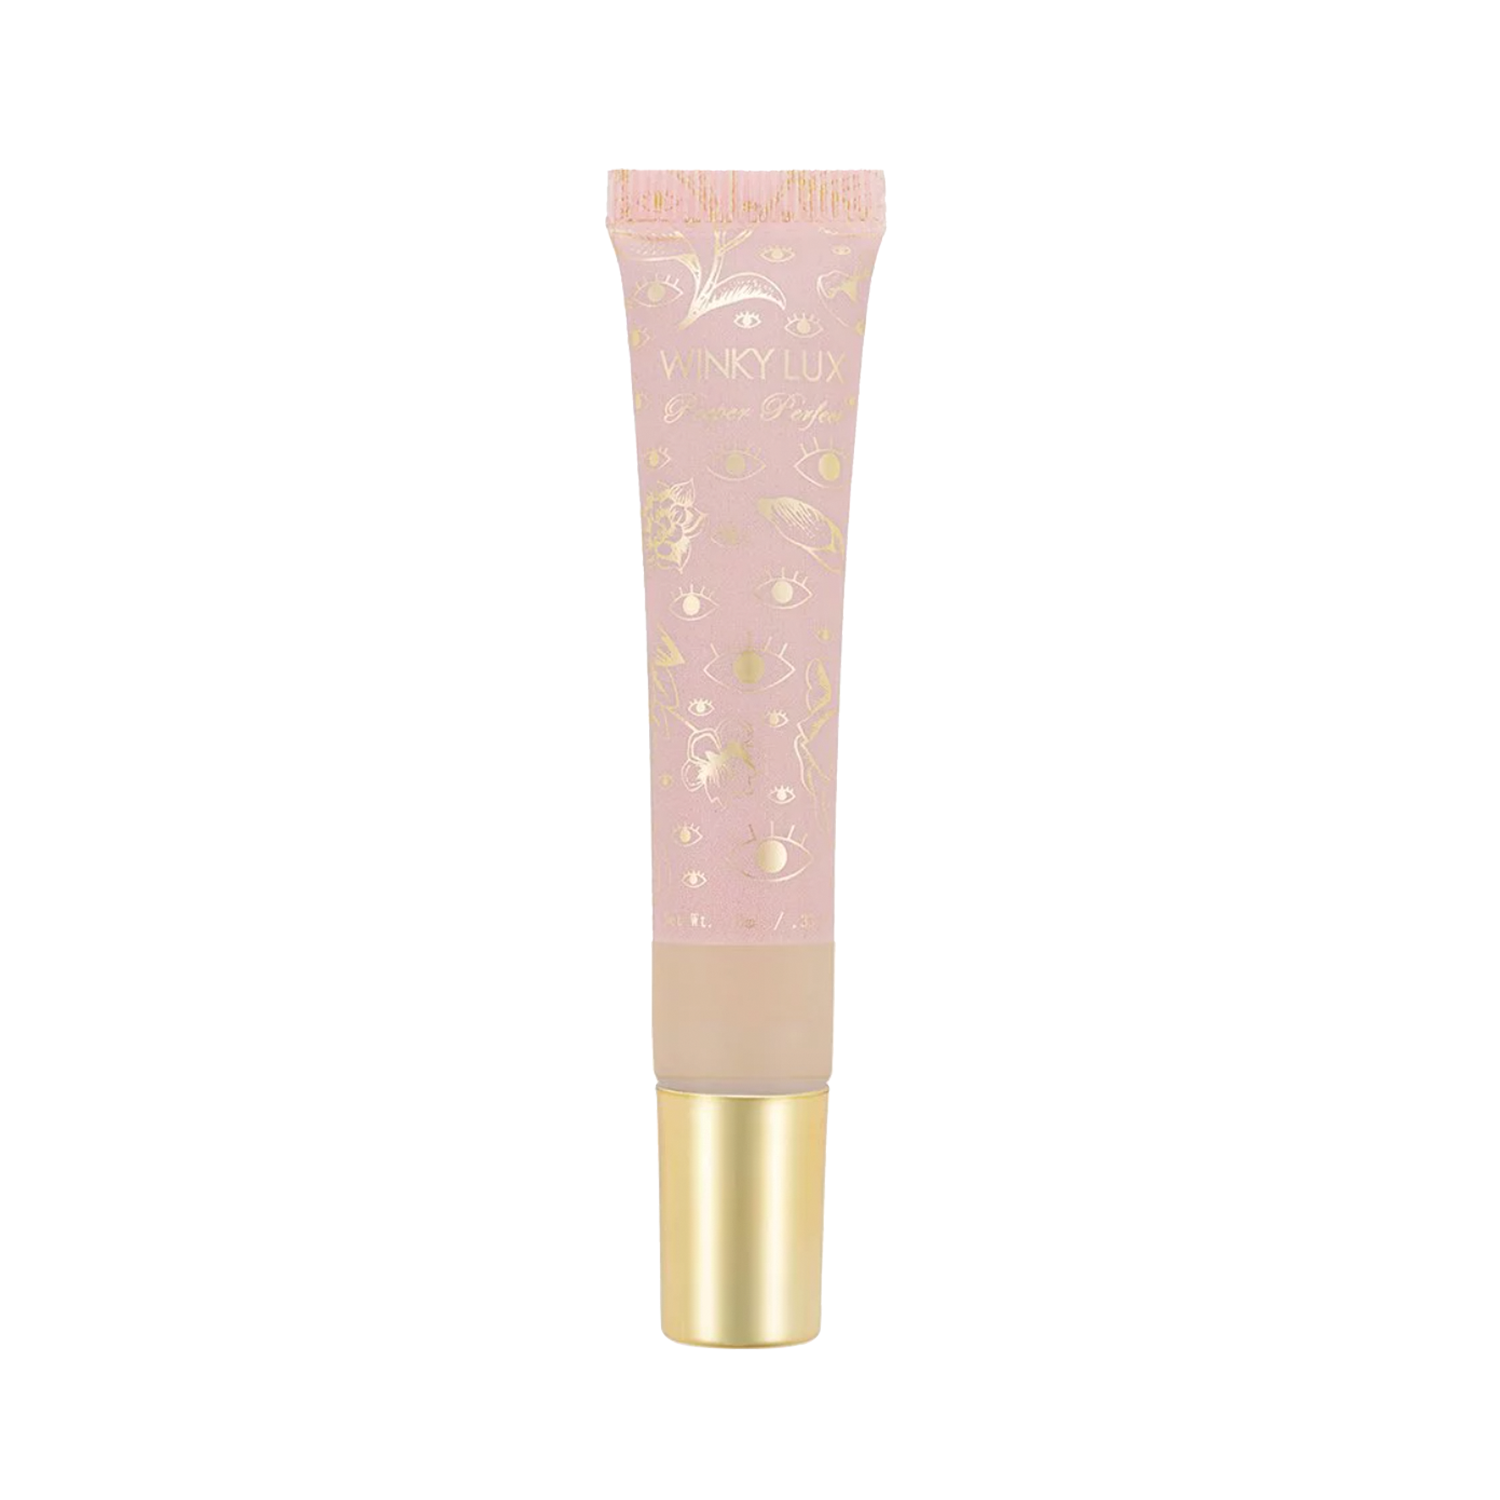 Peeper Perfect Concealer Winky Lux Peeper Perfect Concealer - Light 1